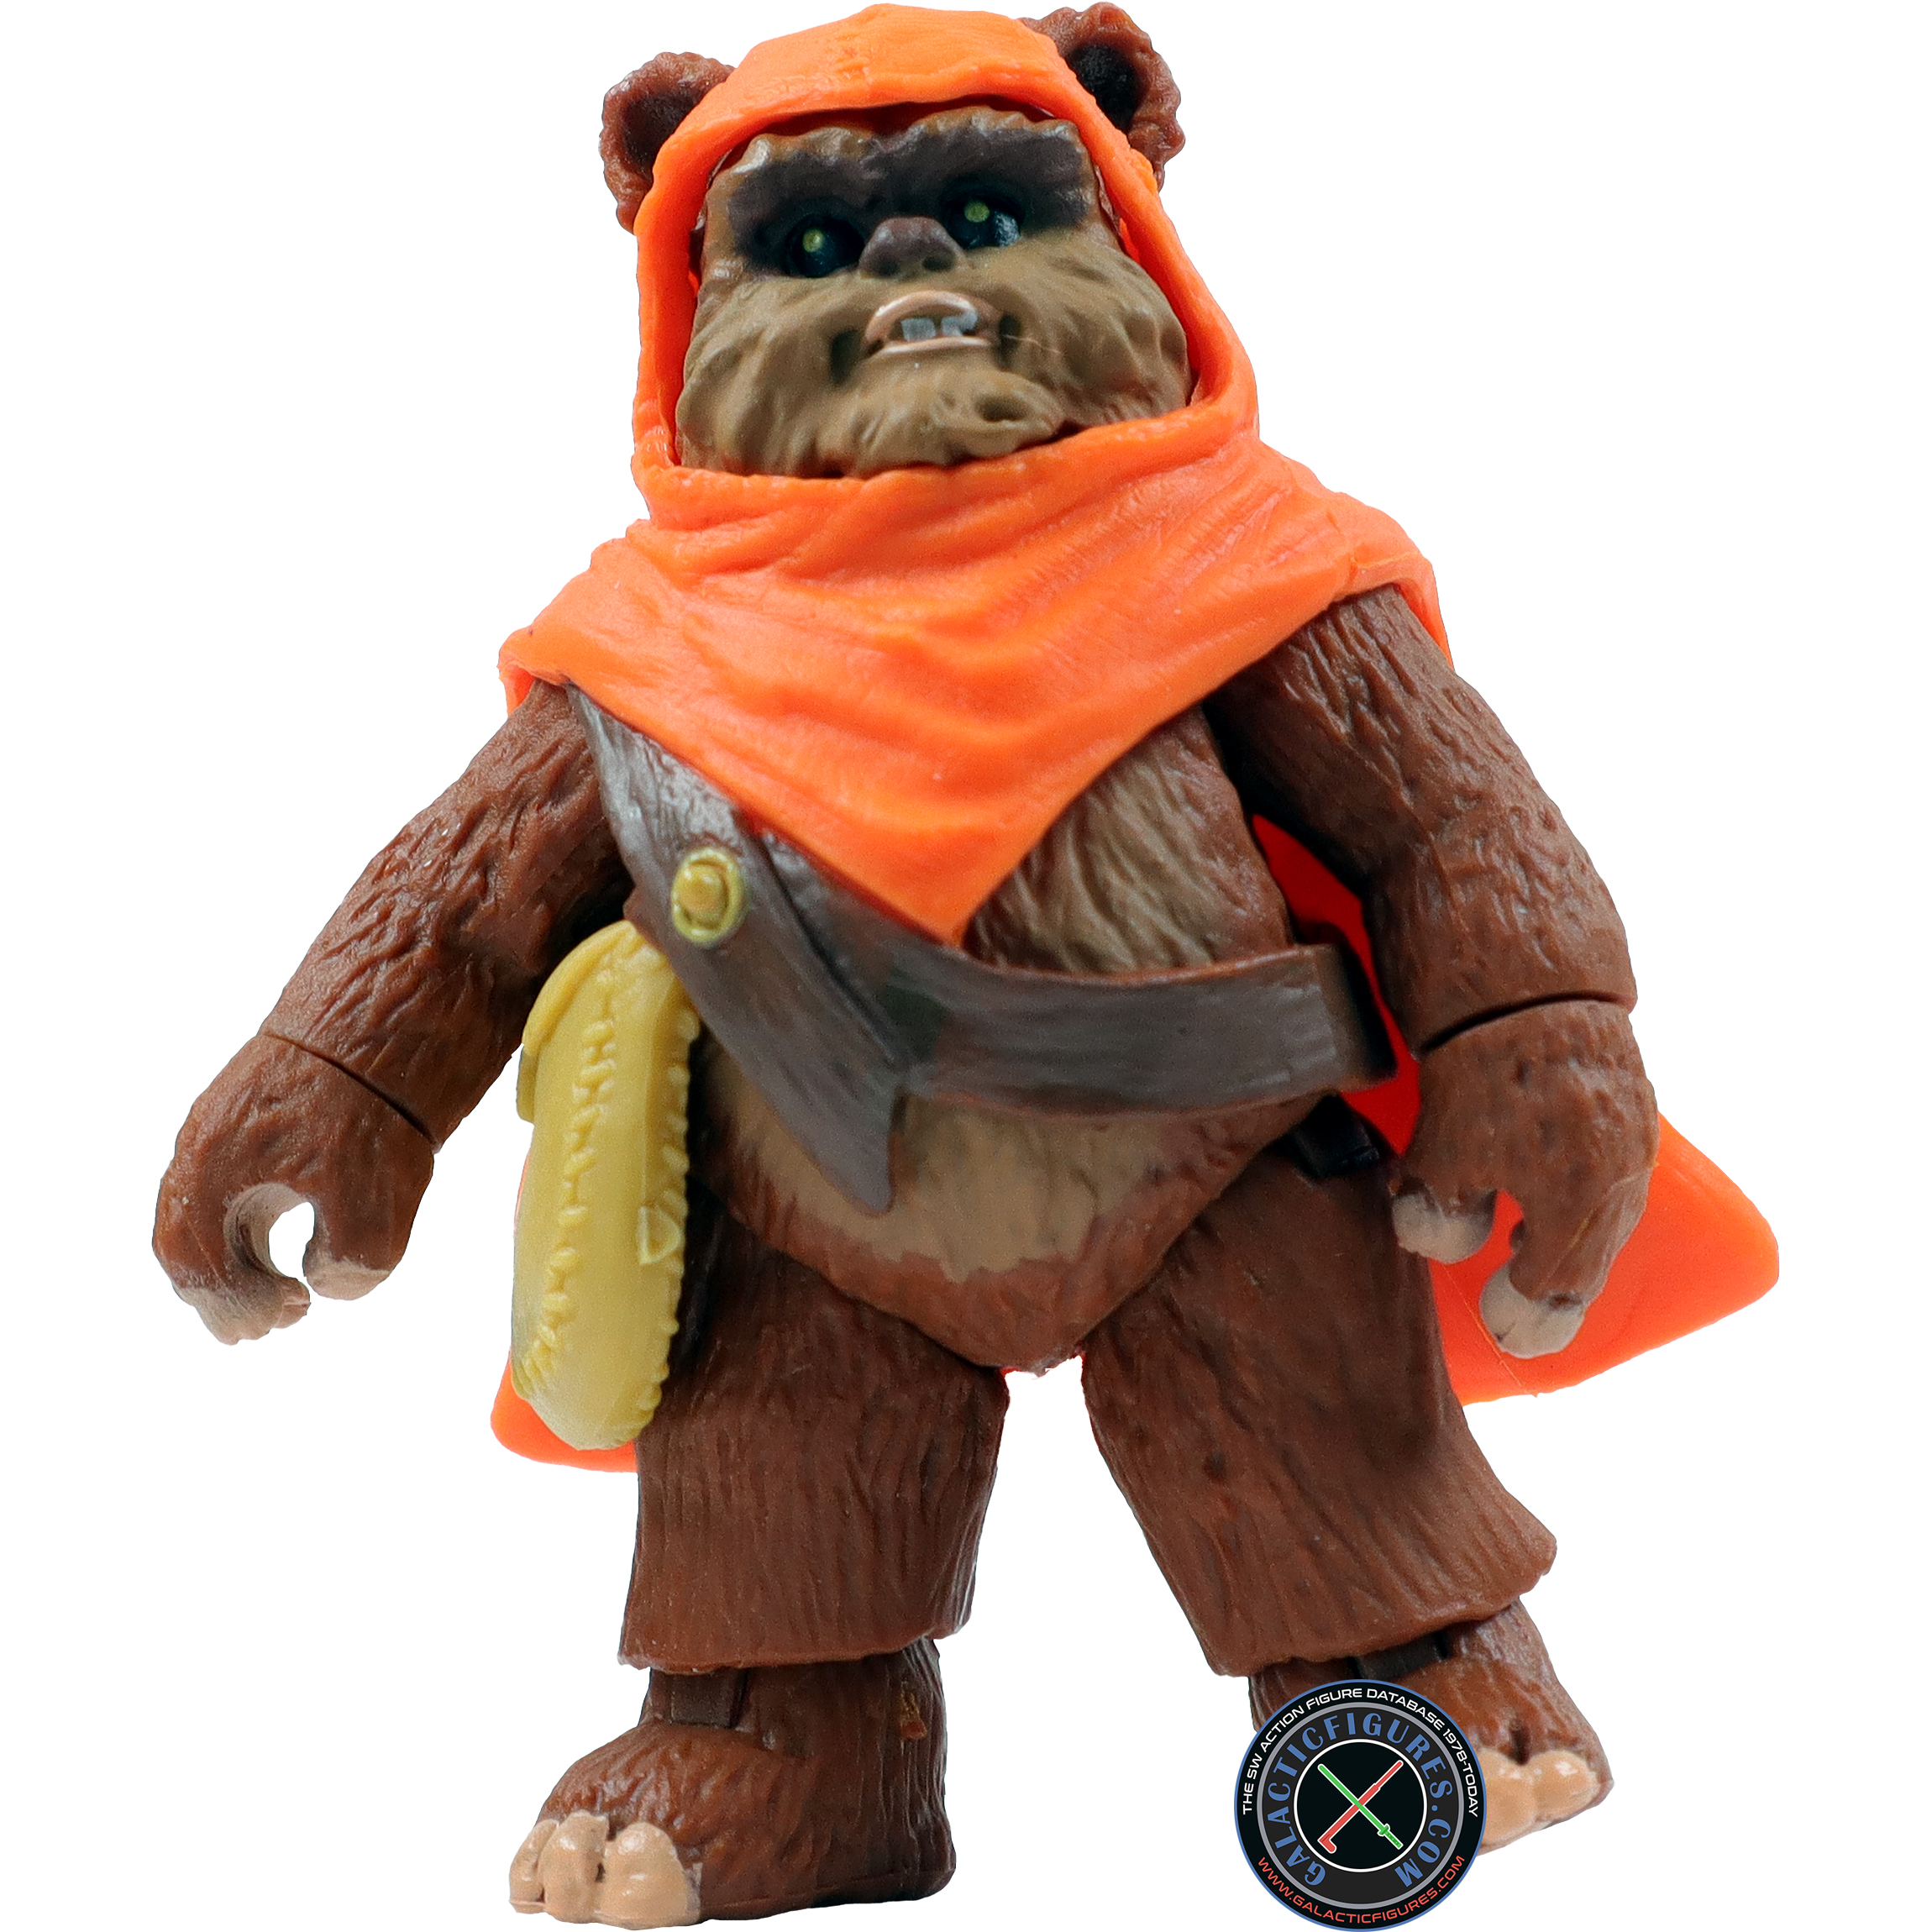 Wicket 2-Pack With Wicket And Kneesa